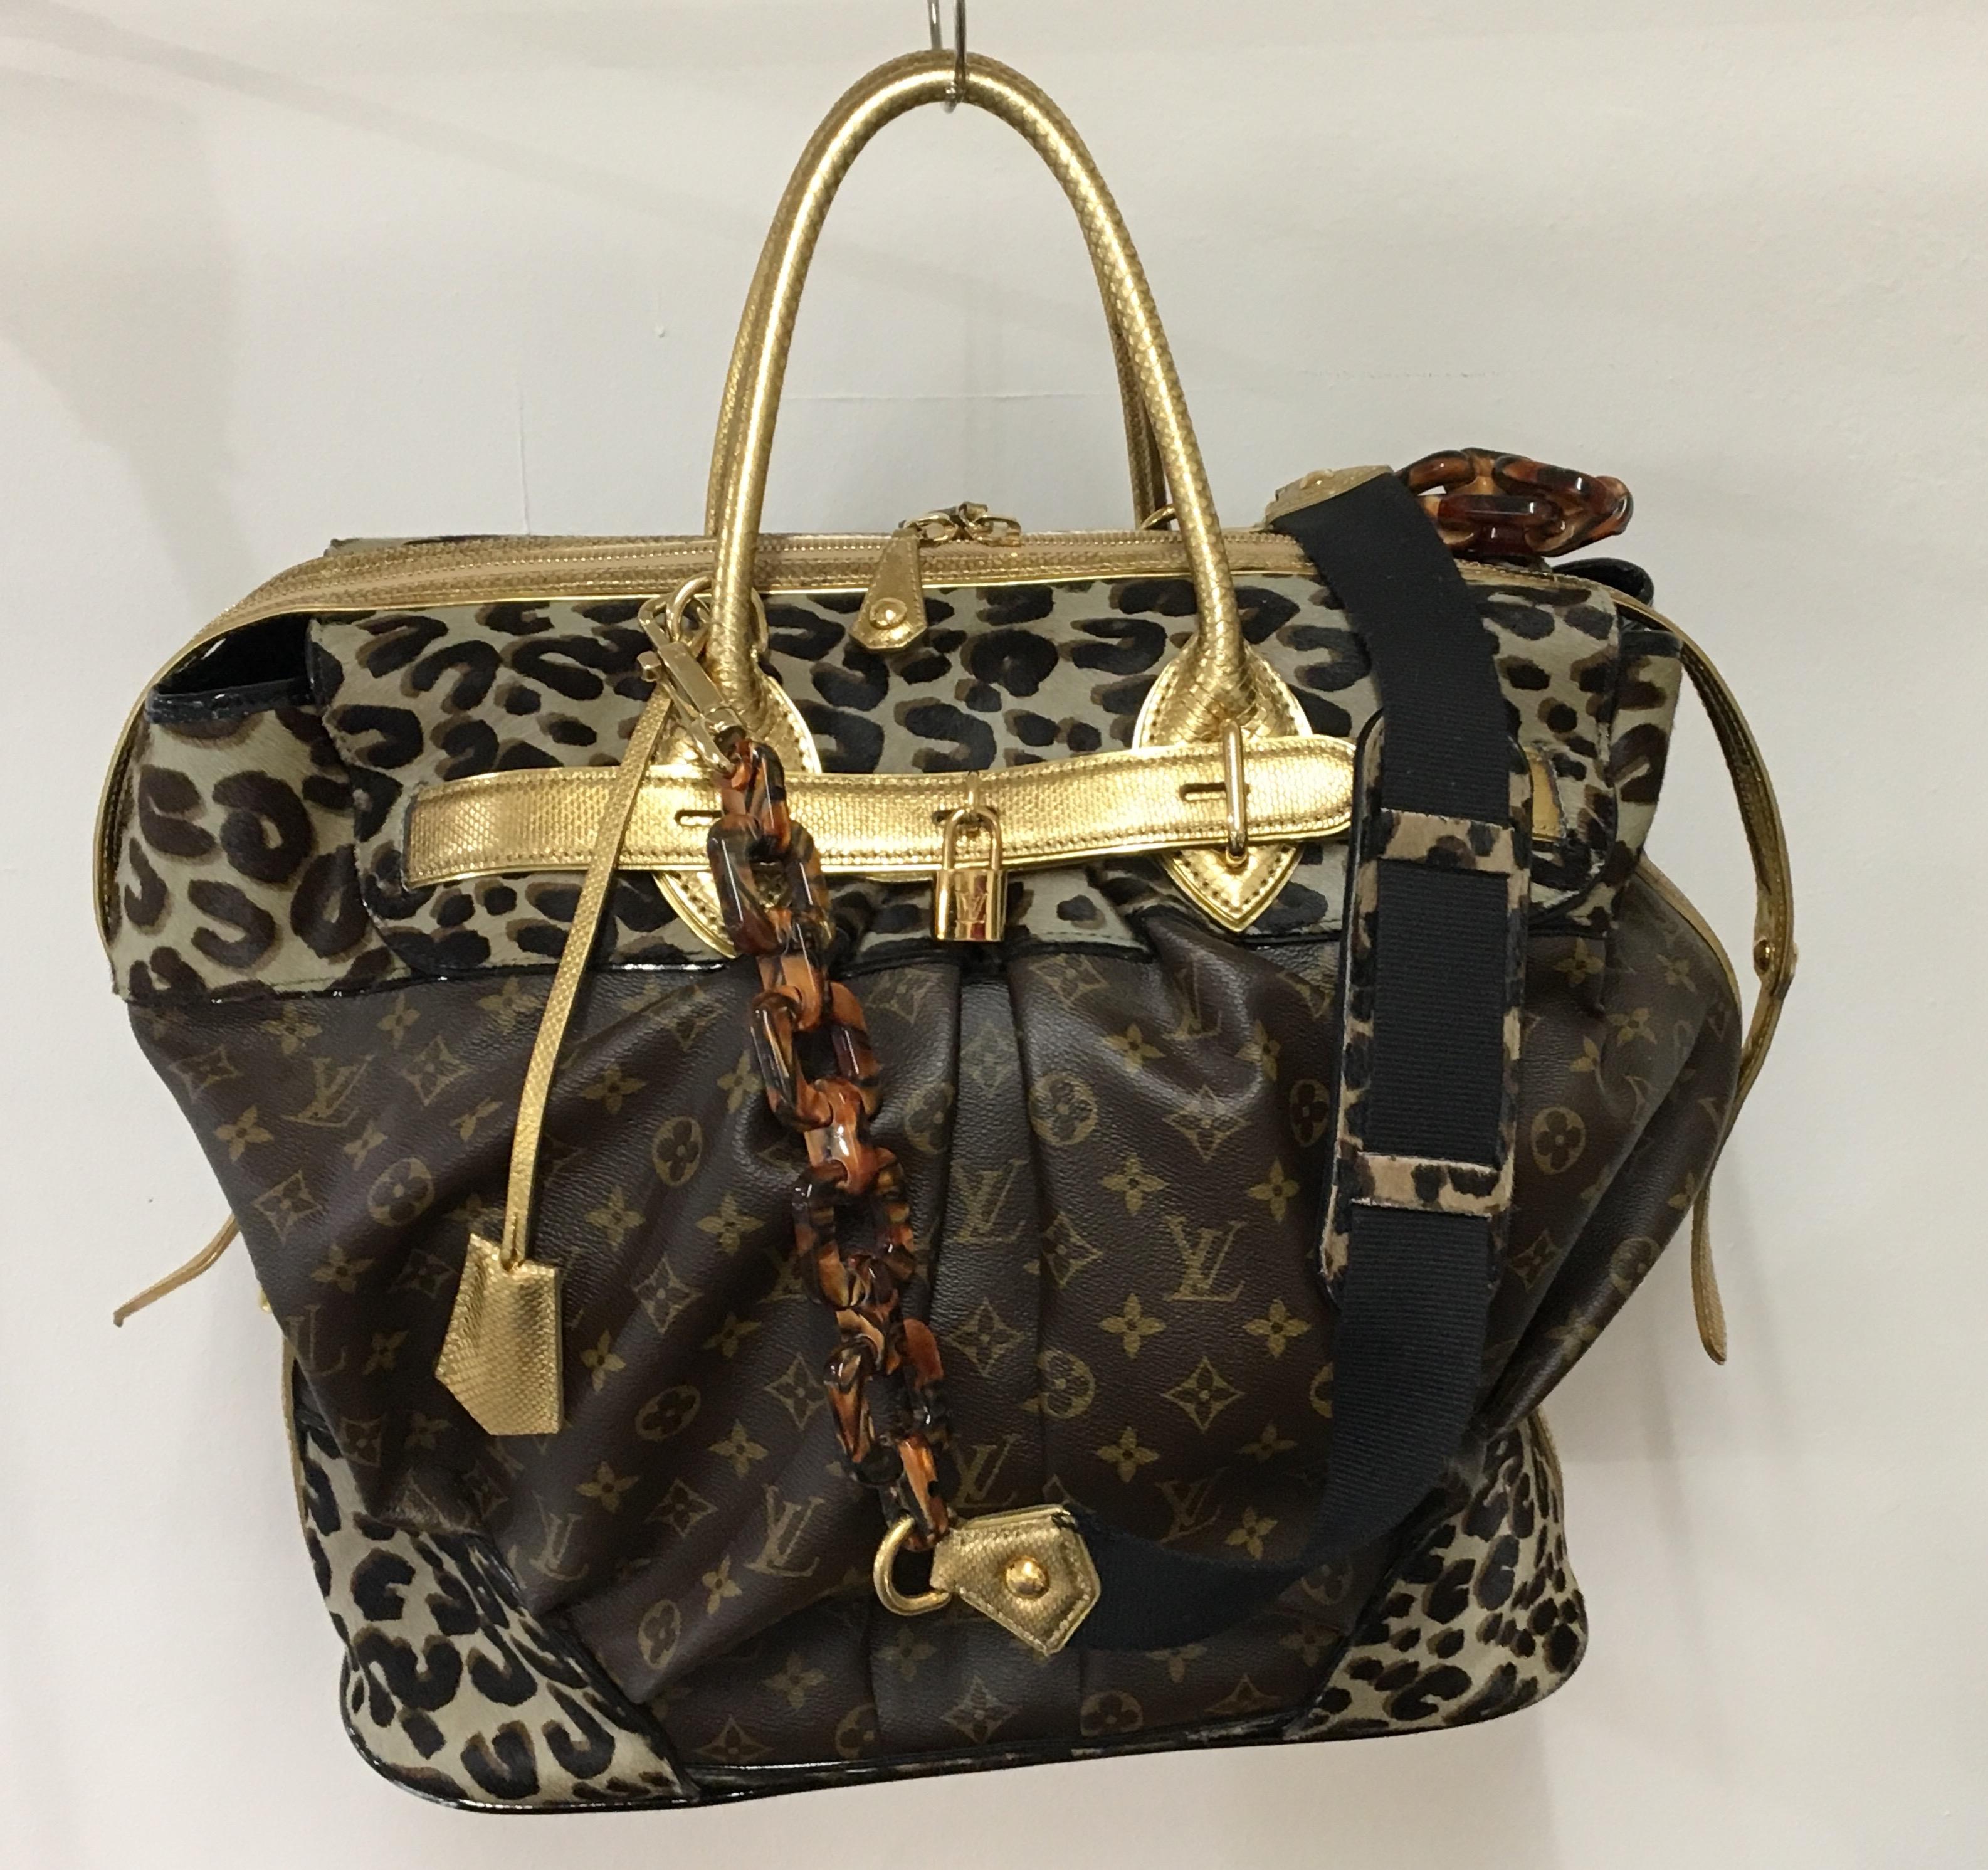 Beautiful and very particular Louis Vuitton Limited edition bag, with gold details, monogram fabric and cheetah pattern with shoulder strap in different lines.